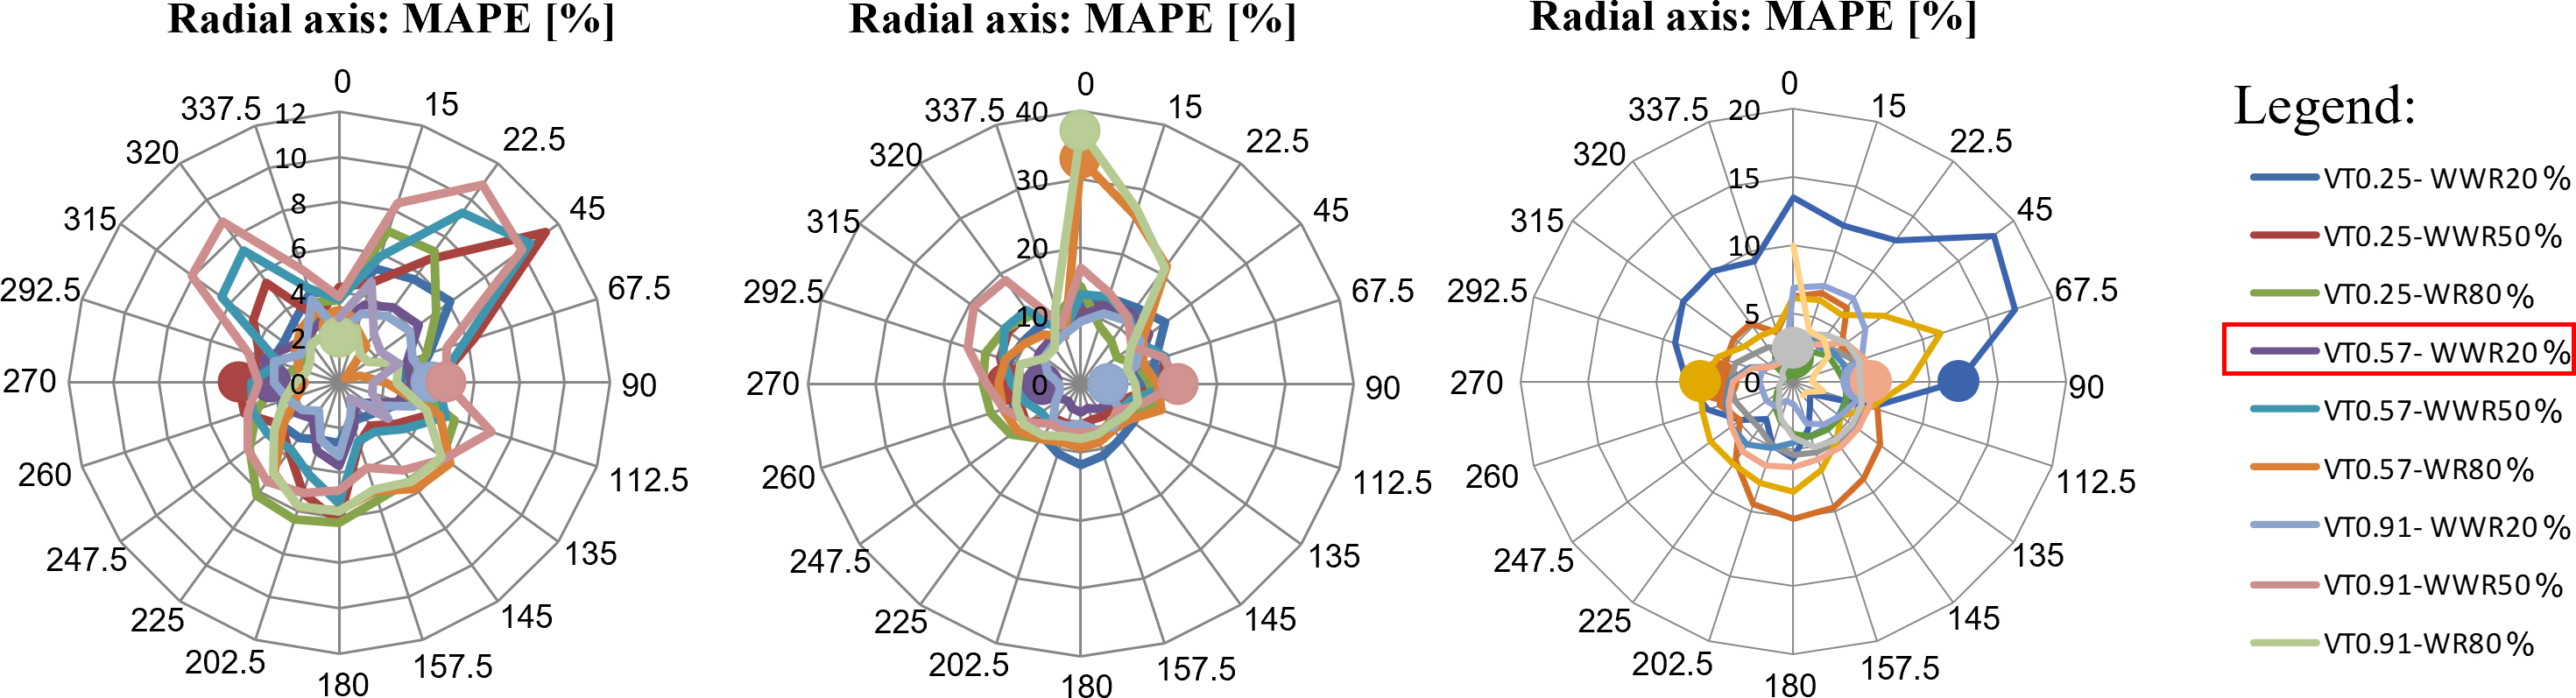 Average MAPE values for the 10 ANNs for Azimuthal + 359° N: grouped by VT and WWR combination: (a) Cooling (b) Heating and (c) Lighting.